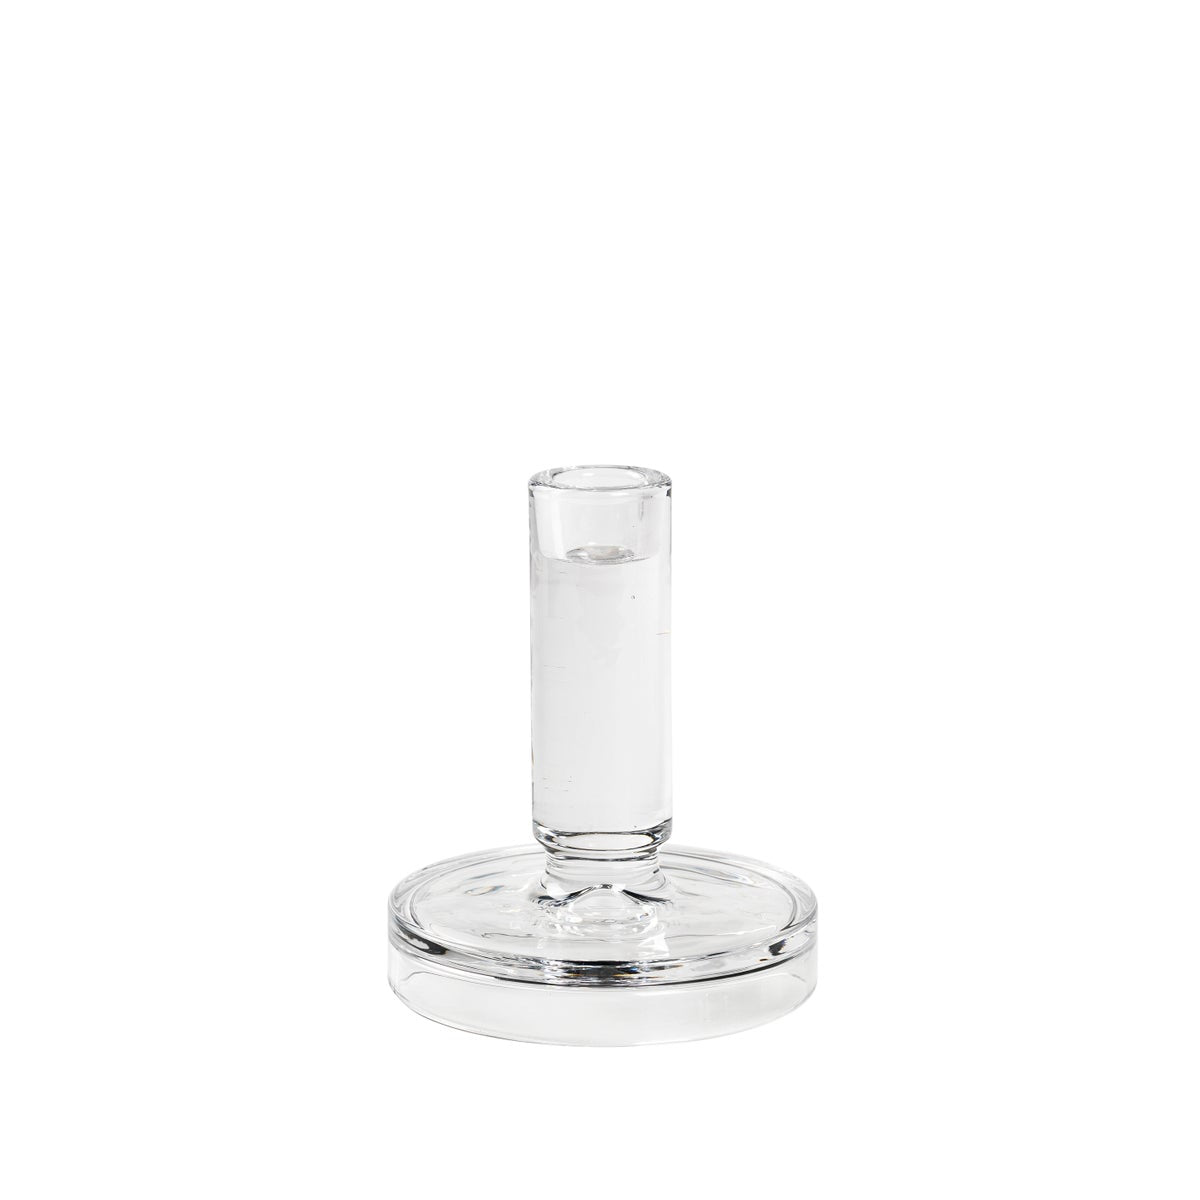 BROSTE Candleholder Petra Clear - 3 sizes